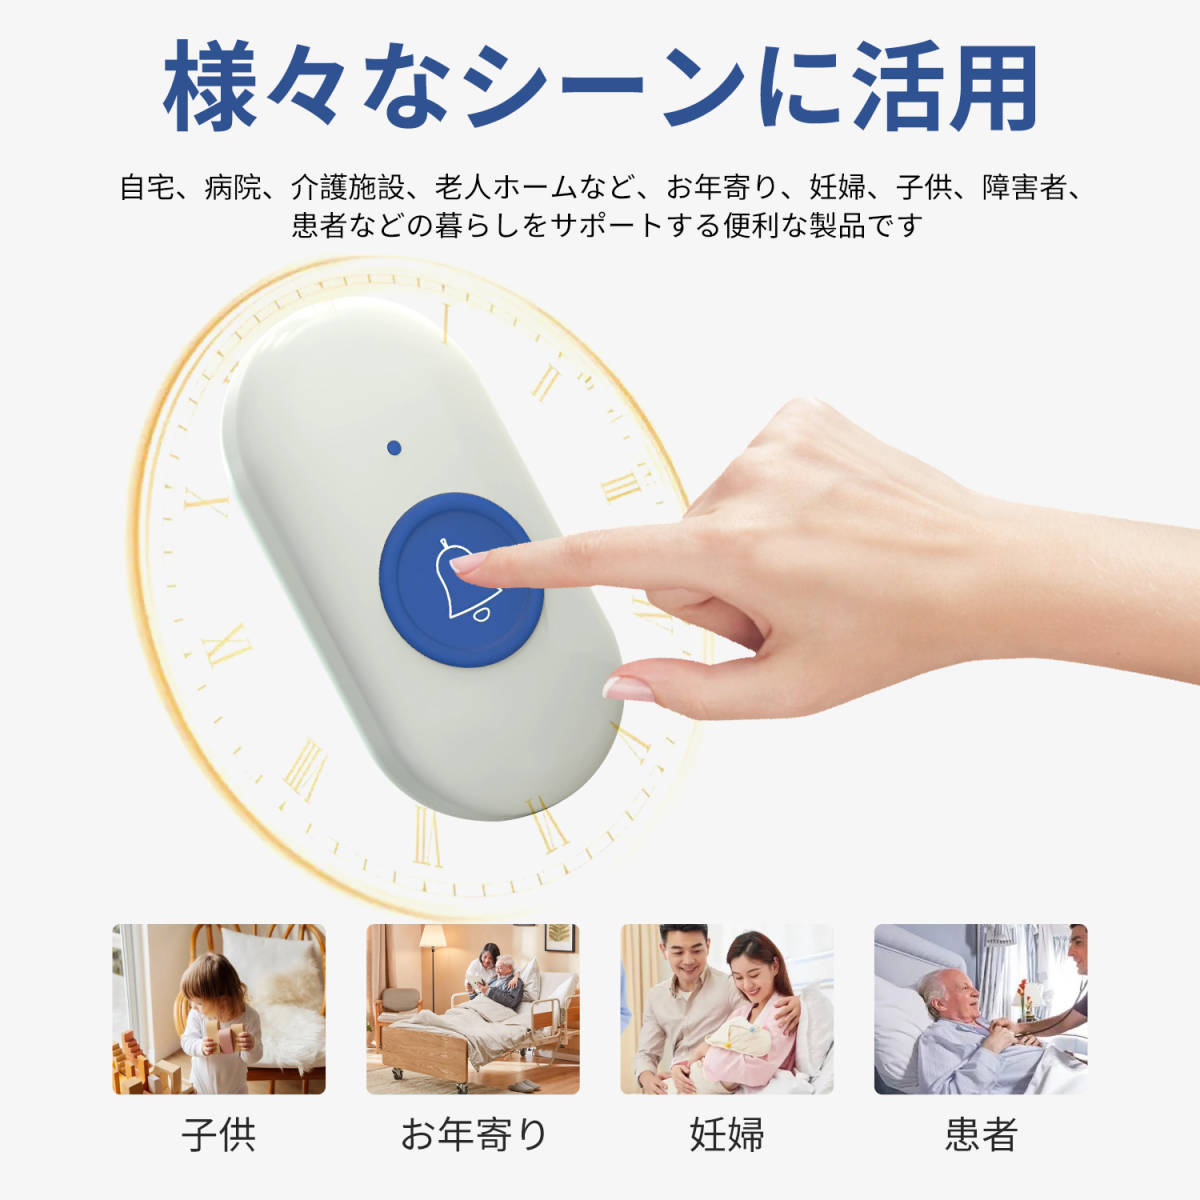 .... bell nursing pocket bell wireless call button alarm system regarding seniours private person for 